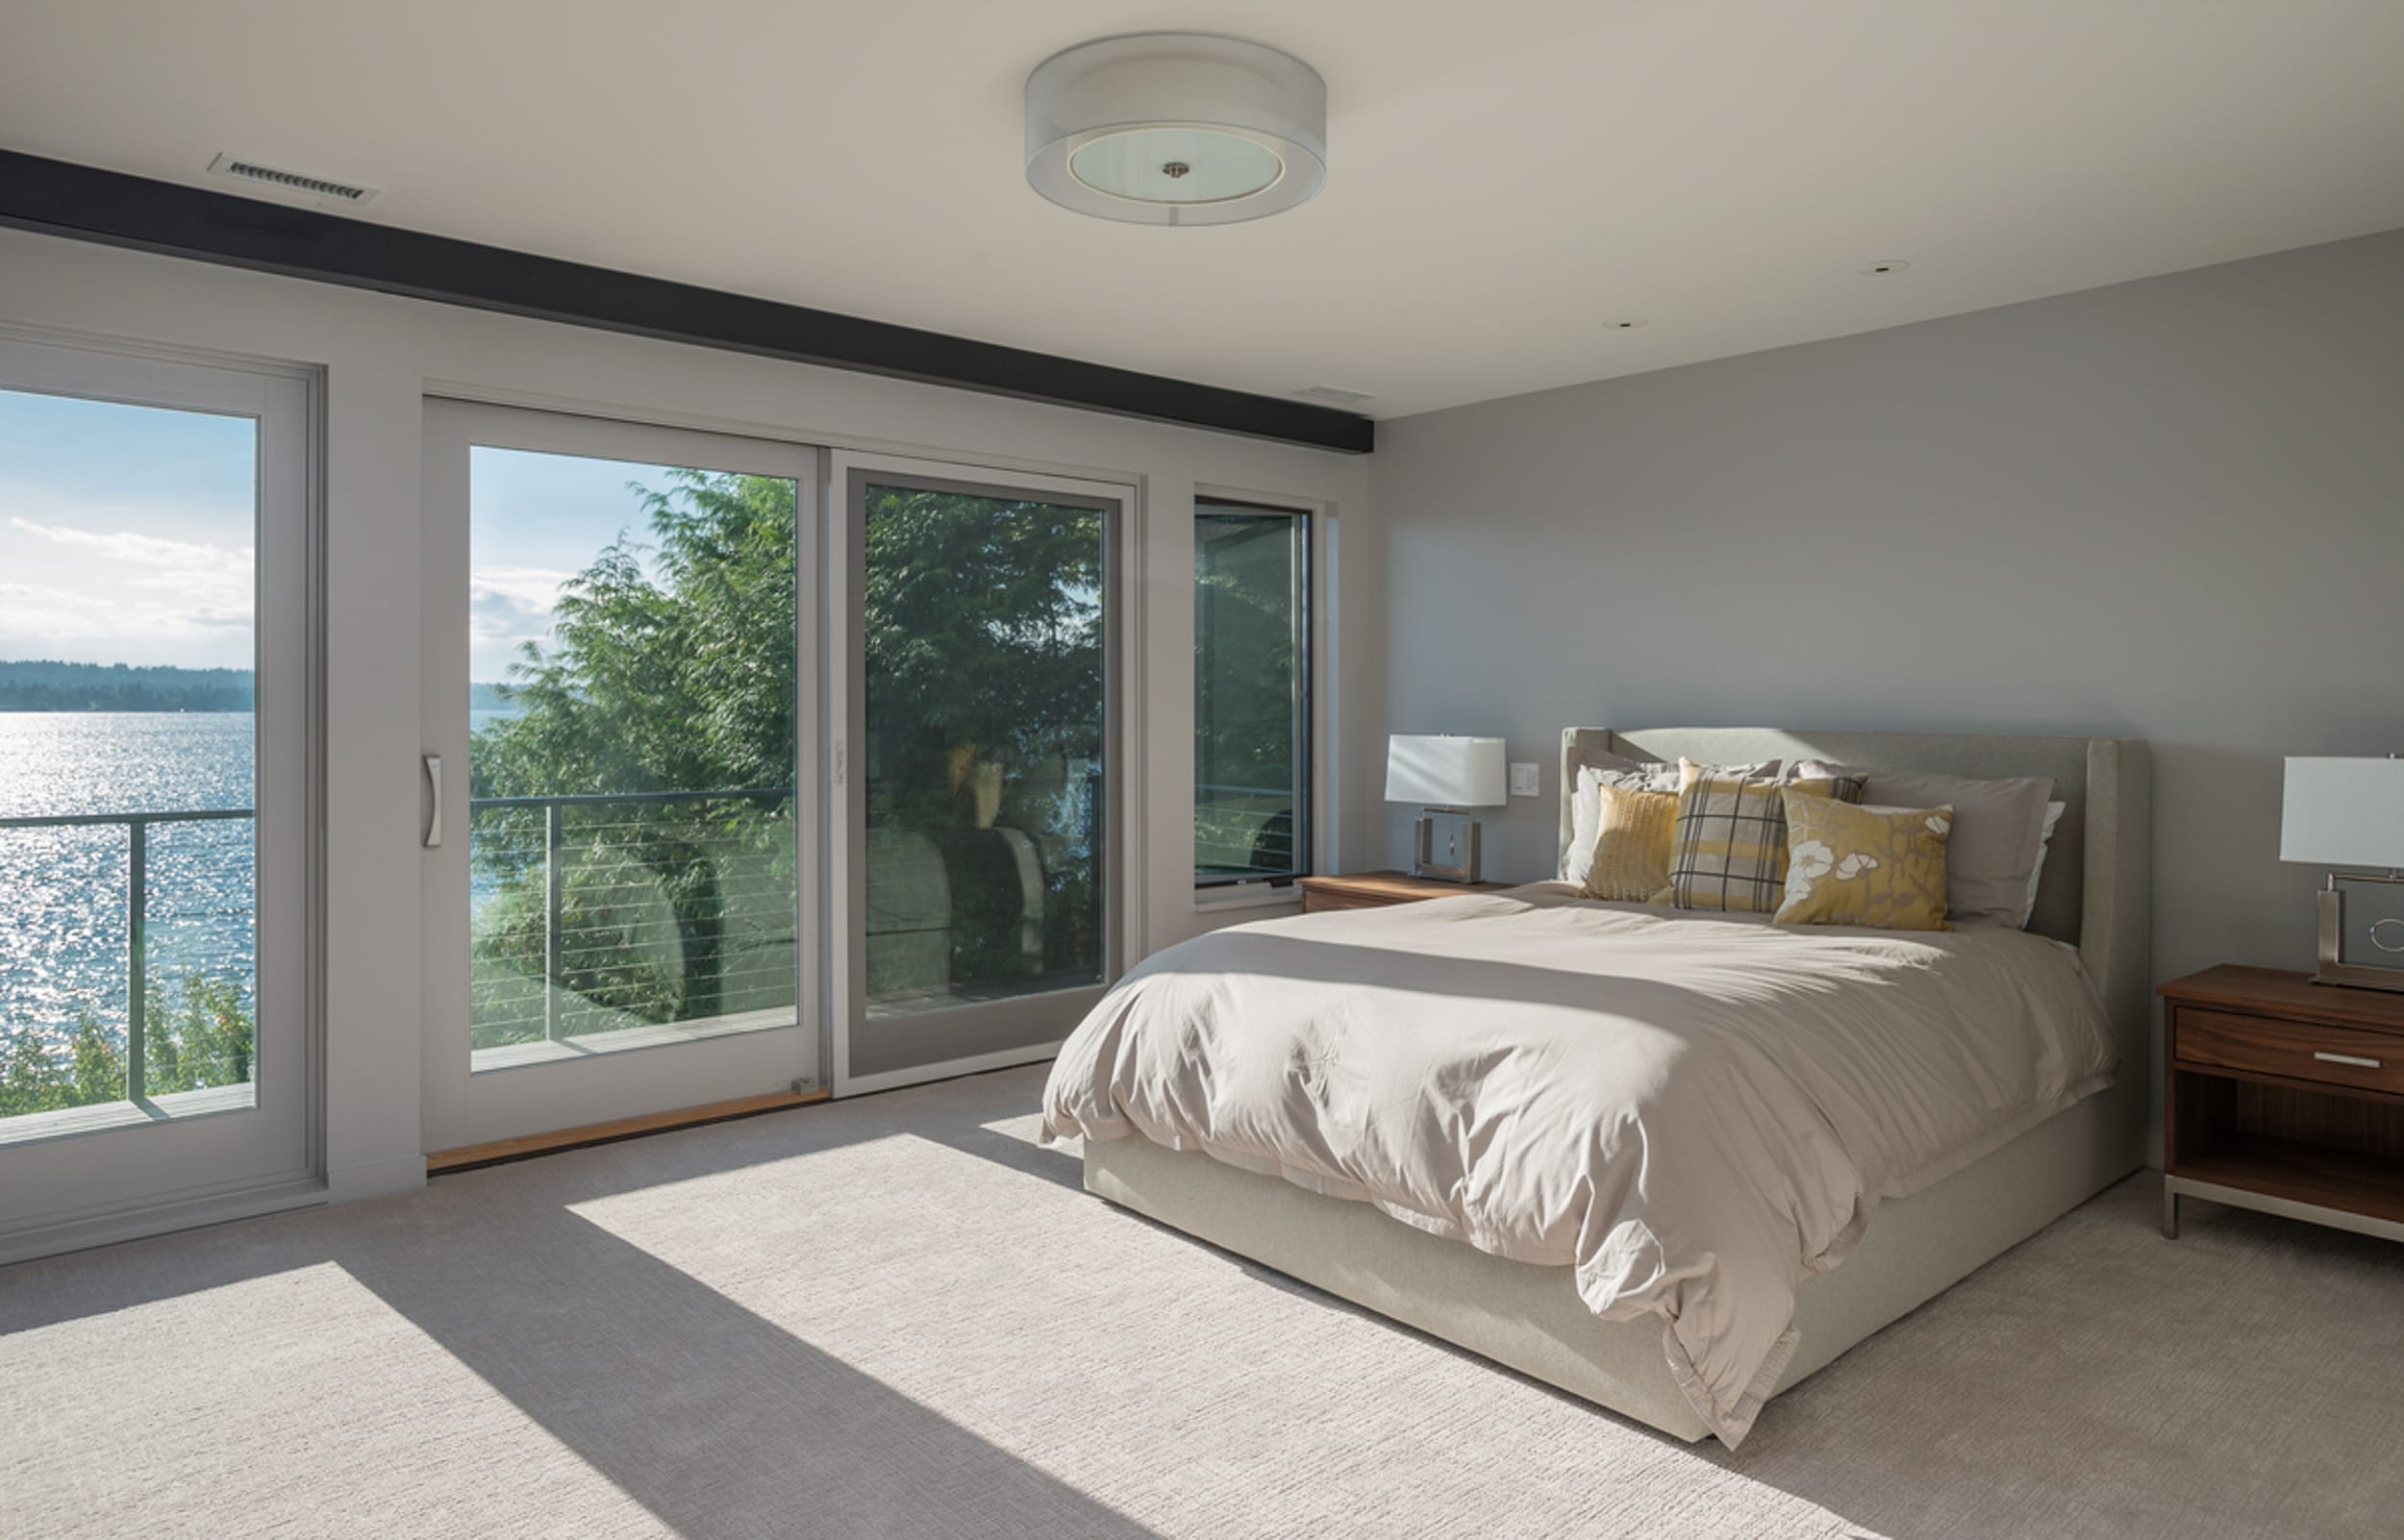 A bedroom with sliding glass doors and a view of the water.